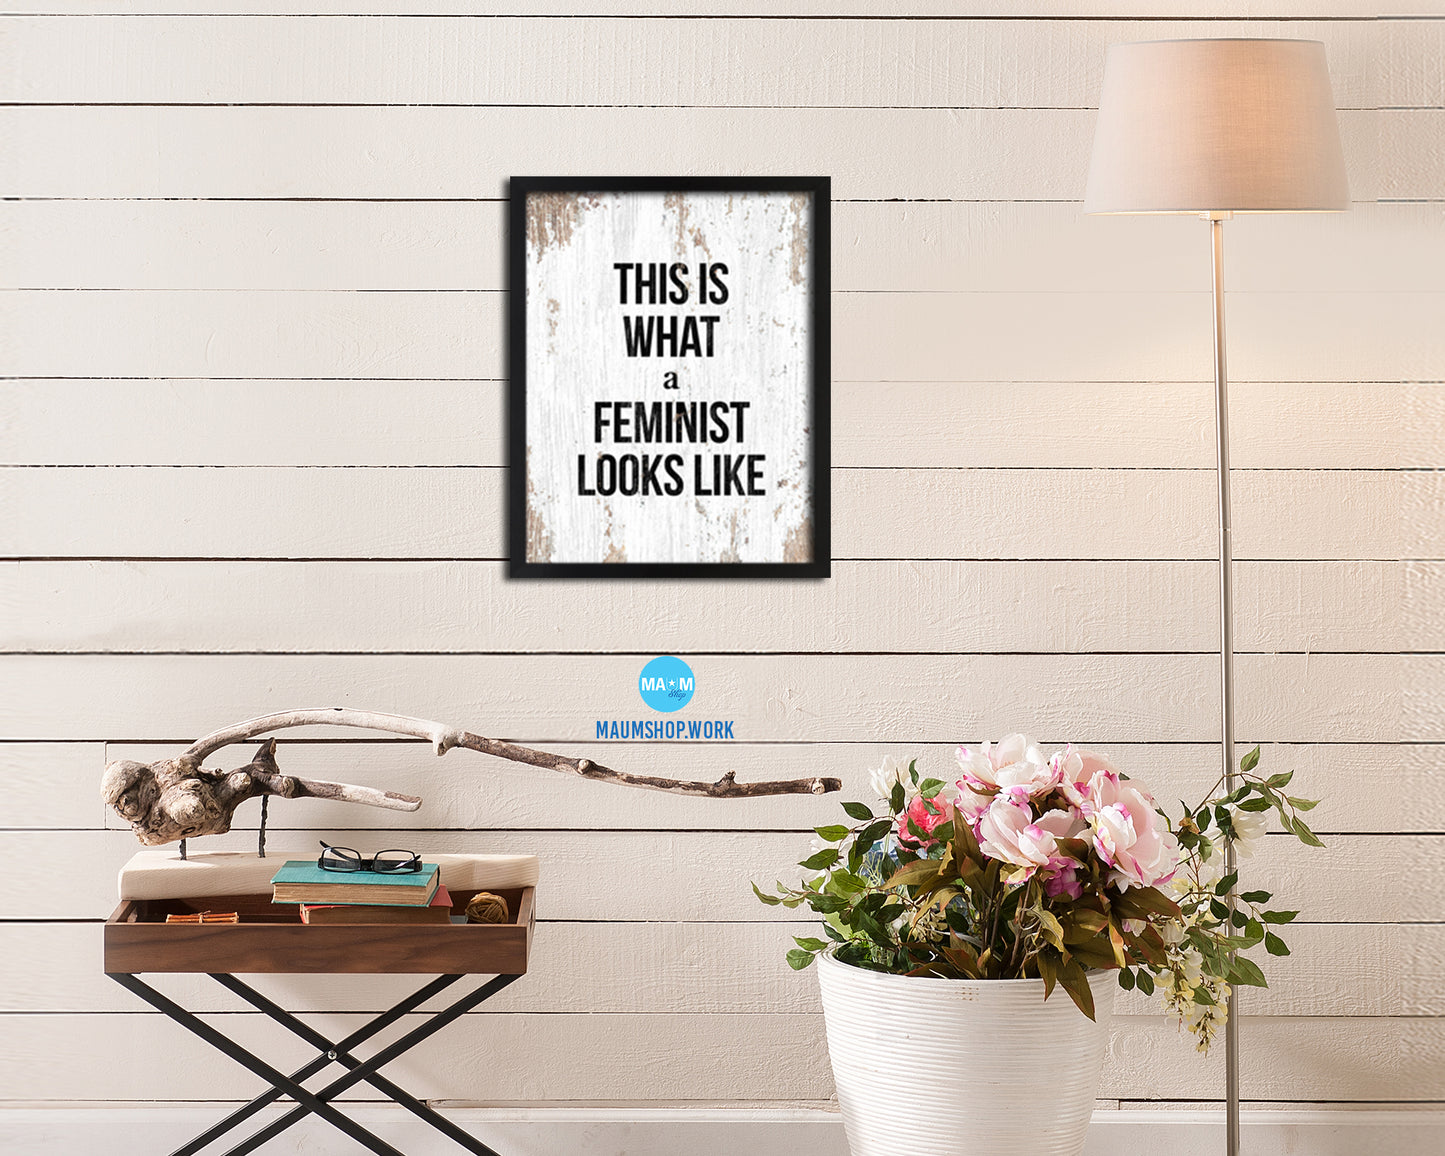 This is what a feminist looks like Rainbow Pride Peace Right Justice Poster Wood Frame Print Art